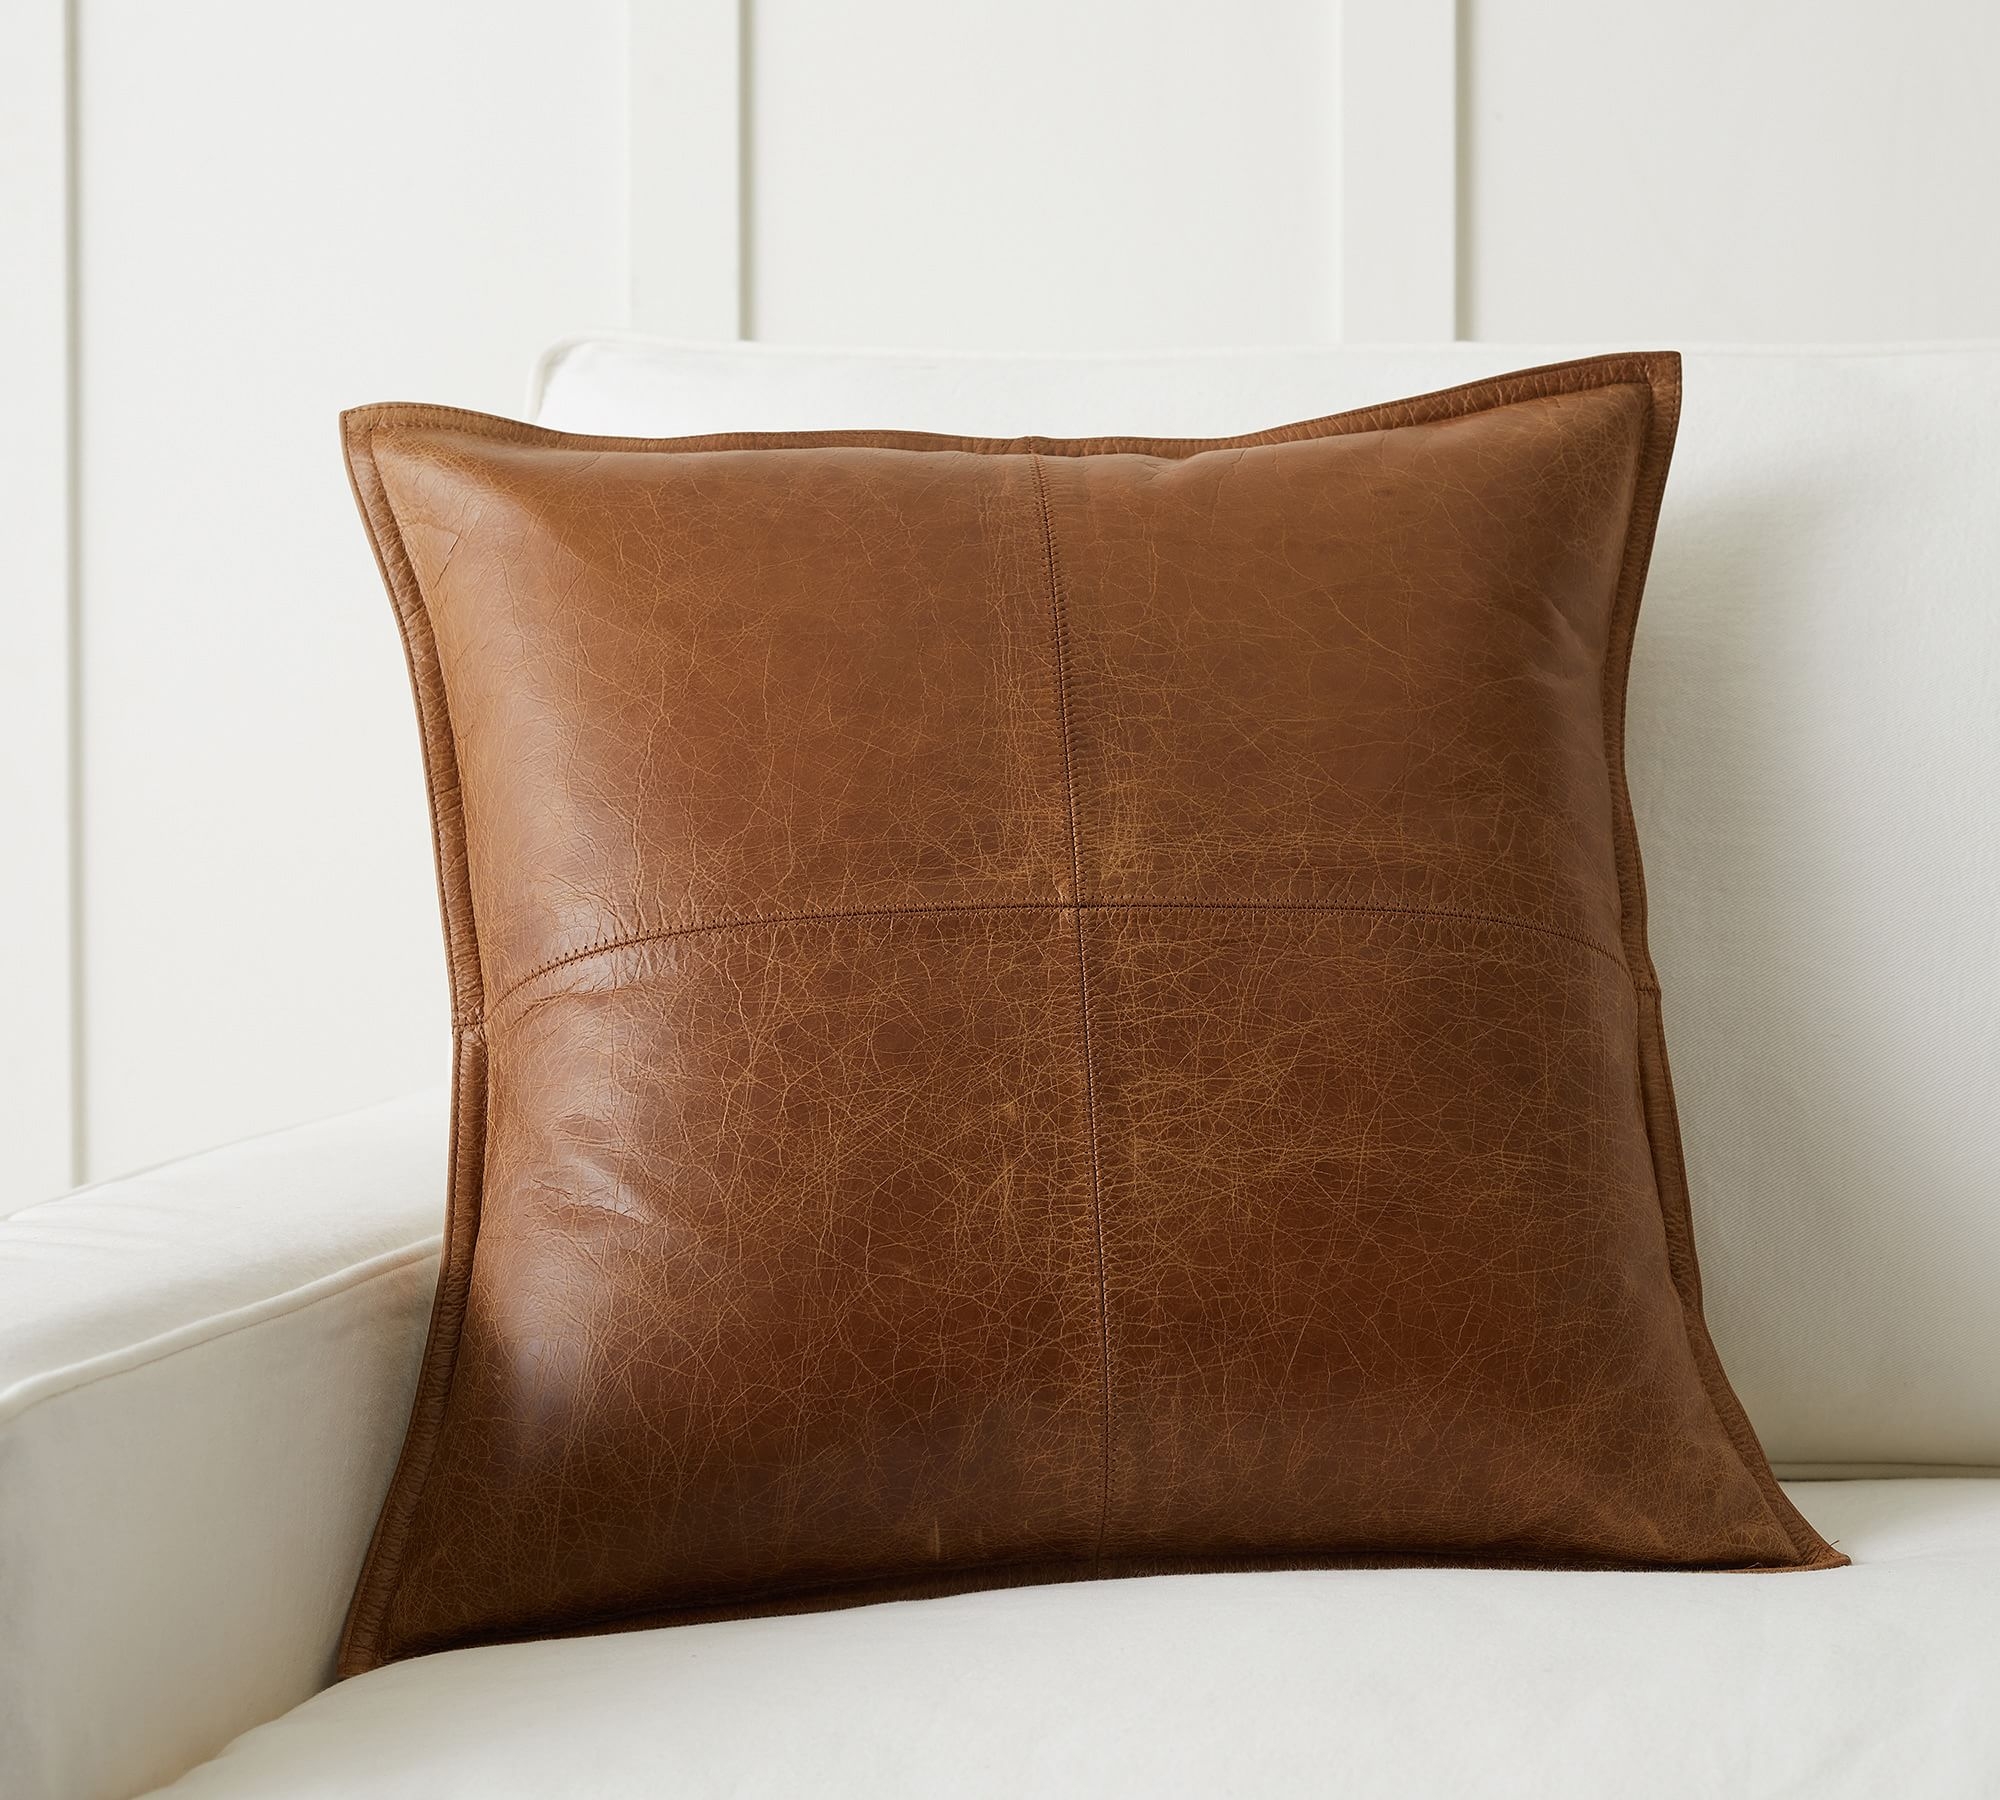 Pieced Leather Pillow Cover, 20", Whiskey Brown - Image 1